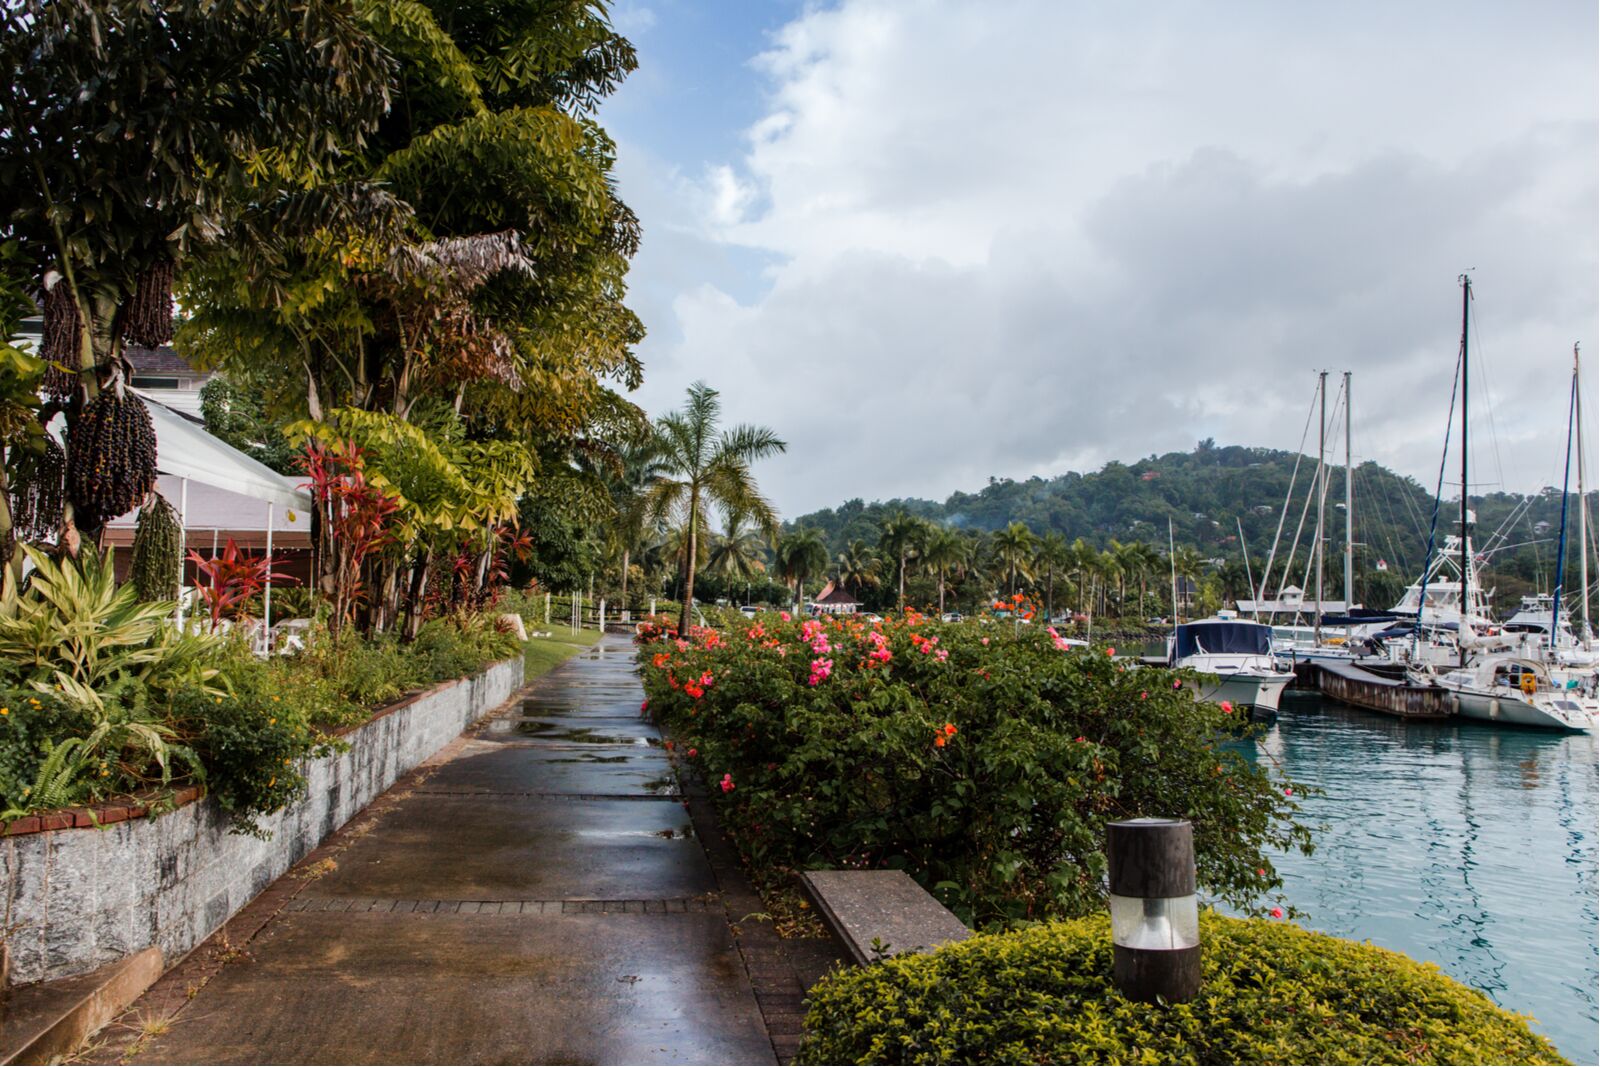 view of walkway and yachts parked in water